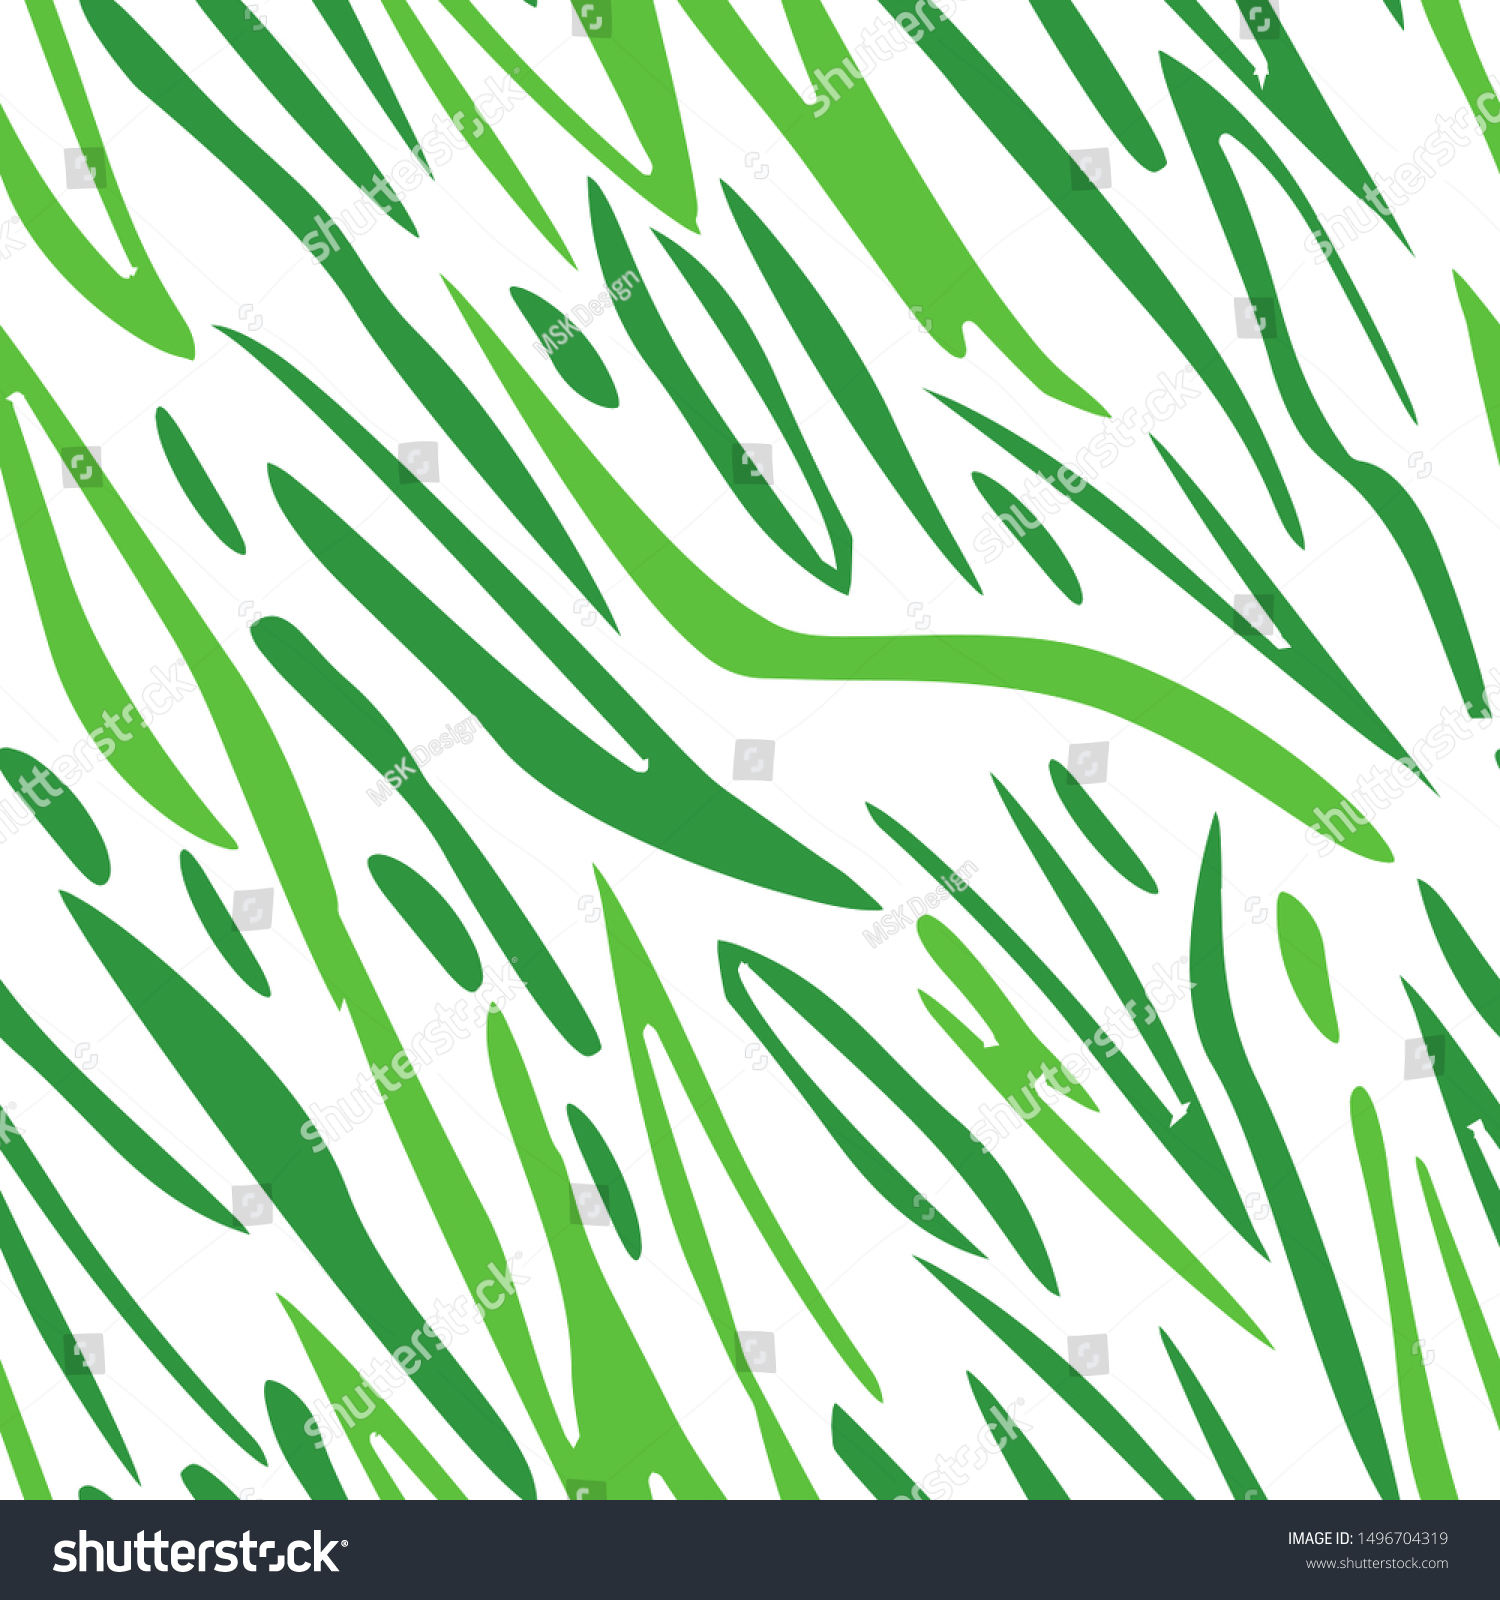 Full seamless decorative classic abstract pattern vector. Grasgreen tones and white modern design with complex stripes for textile fabric printing. Suitable for fashion use. #1496704319